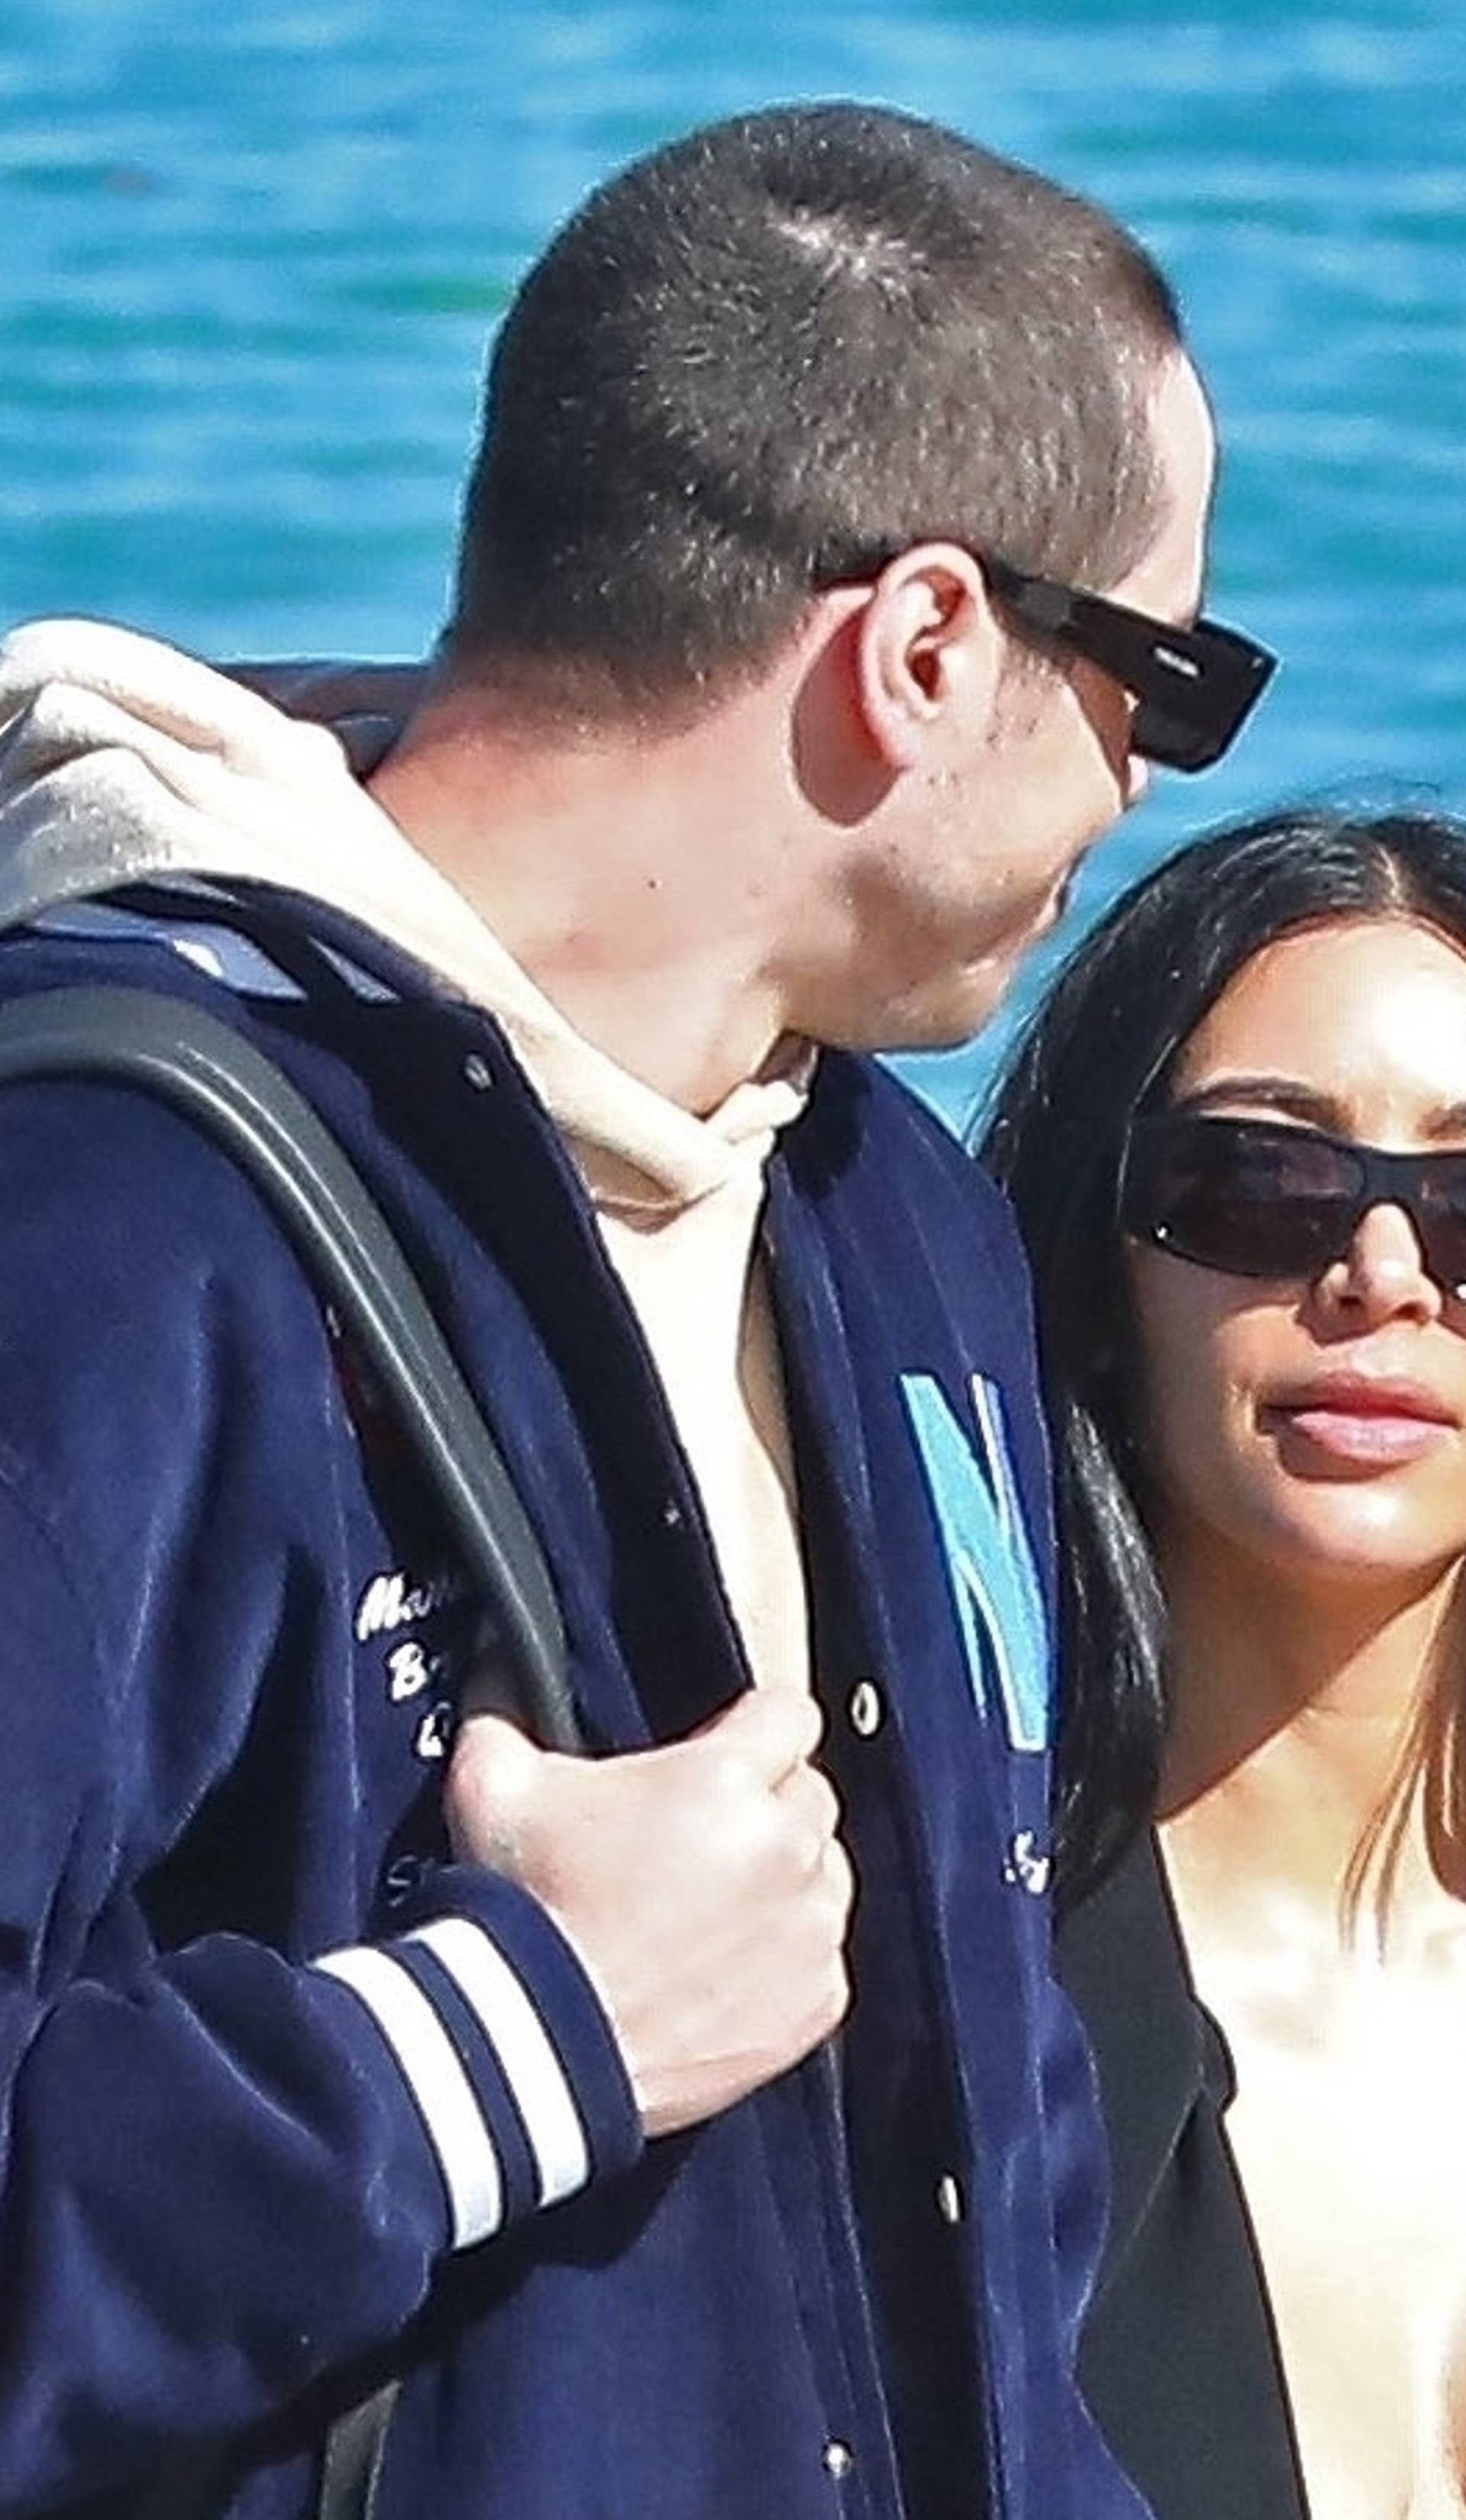 *PREMIUM-EXCLUSIVE* Kim Kardashian and Pete Davidson bring their whirlwind romance to the Bahamas! **MUST CALL FOR PRICING**